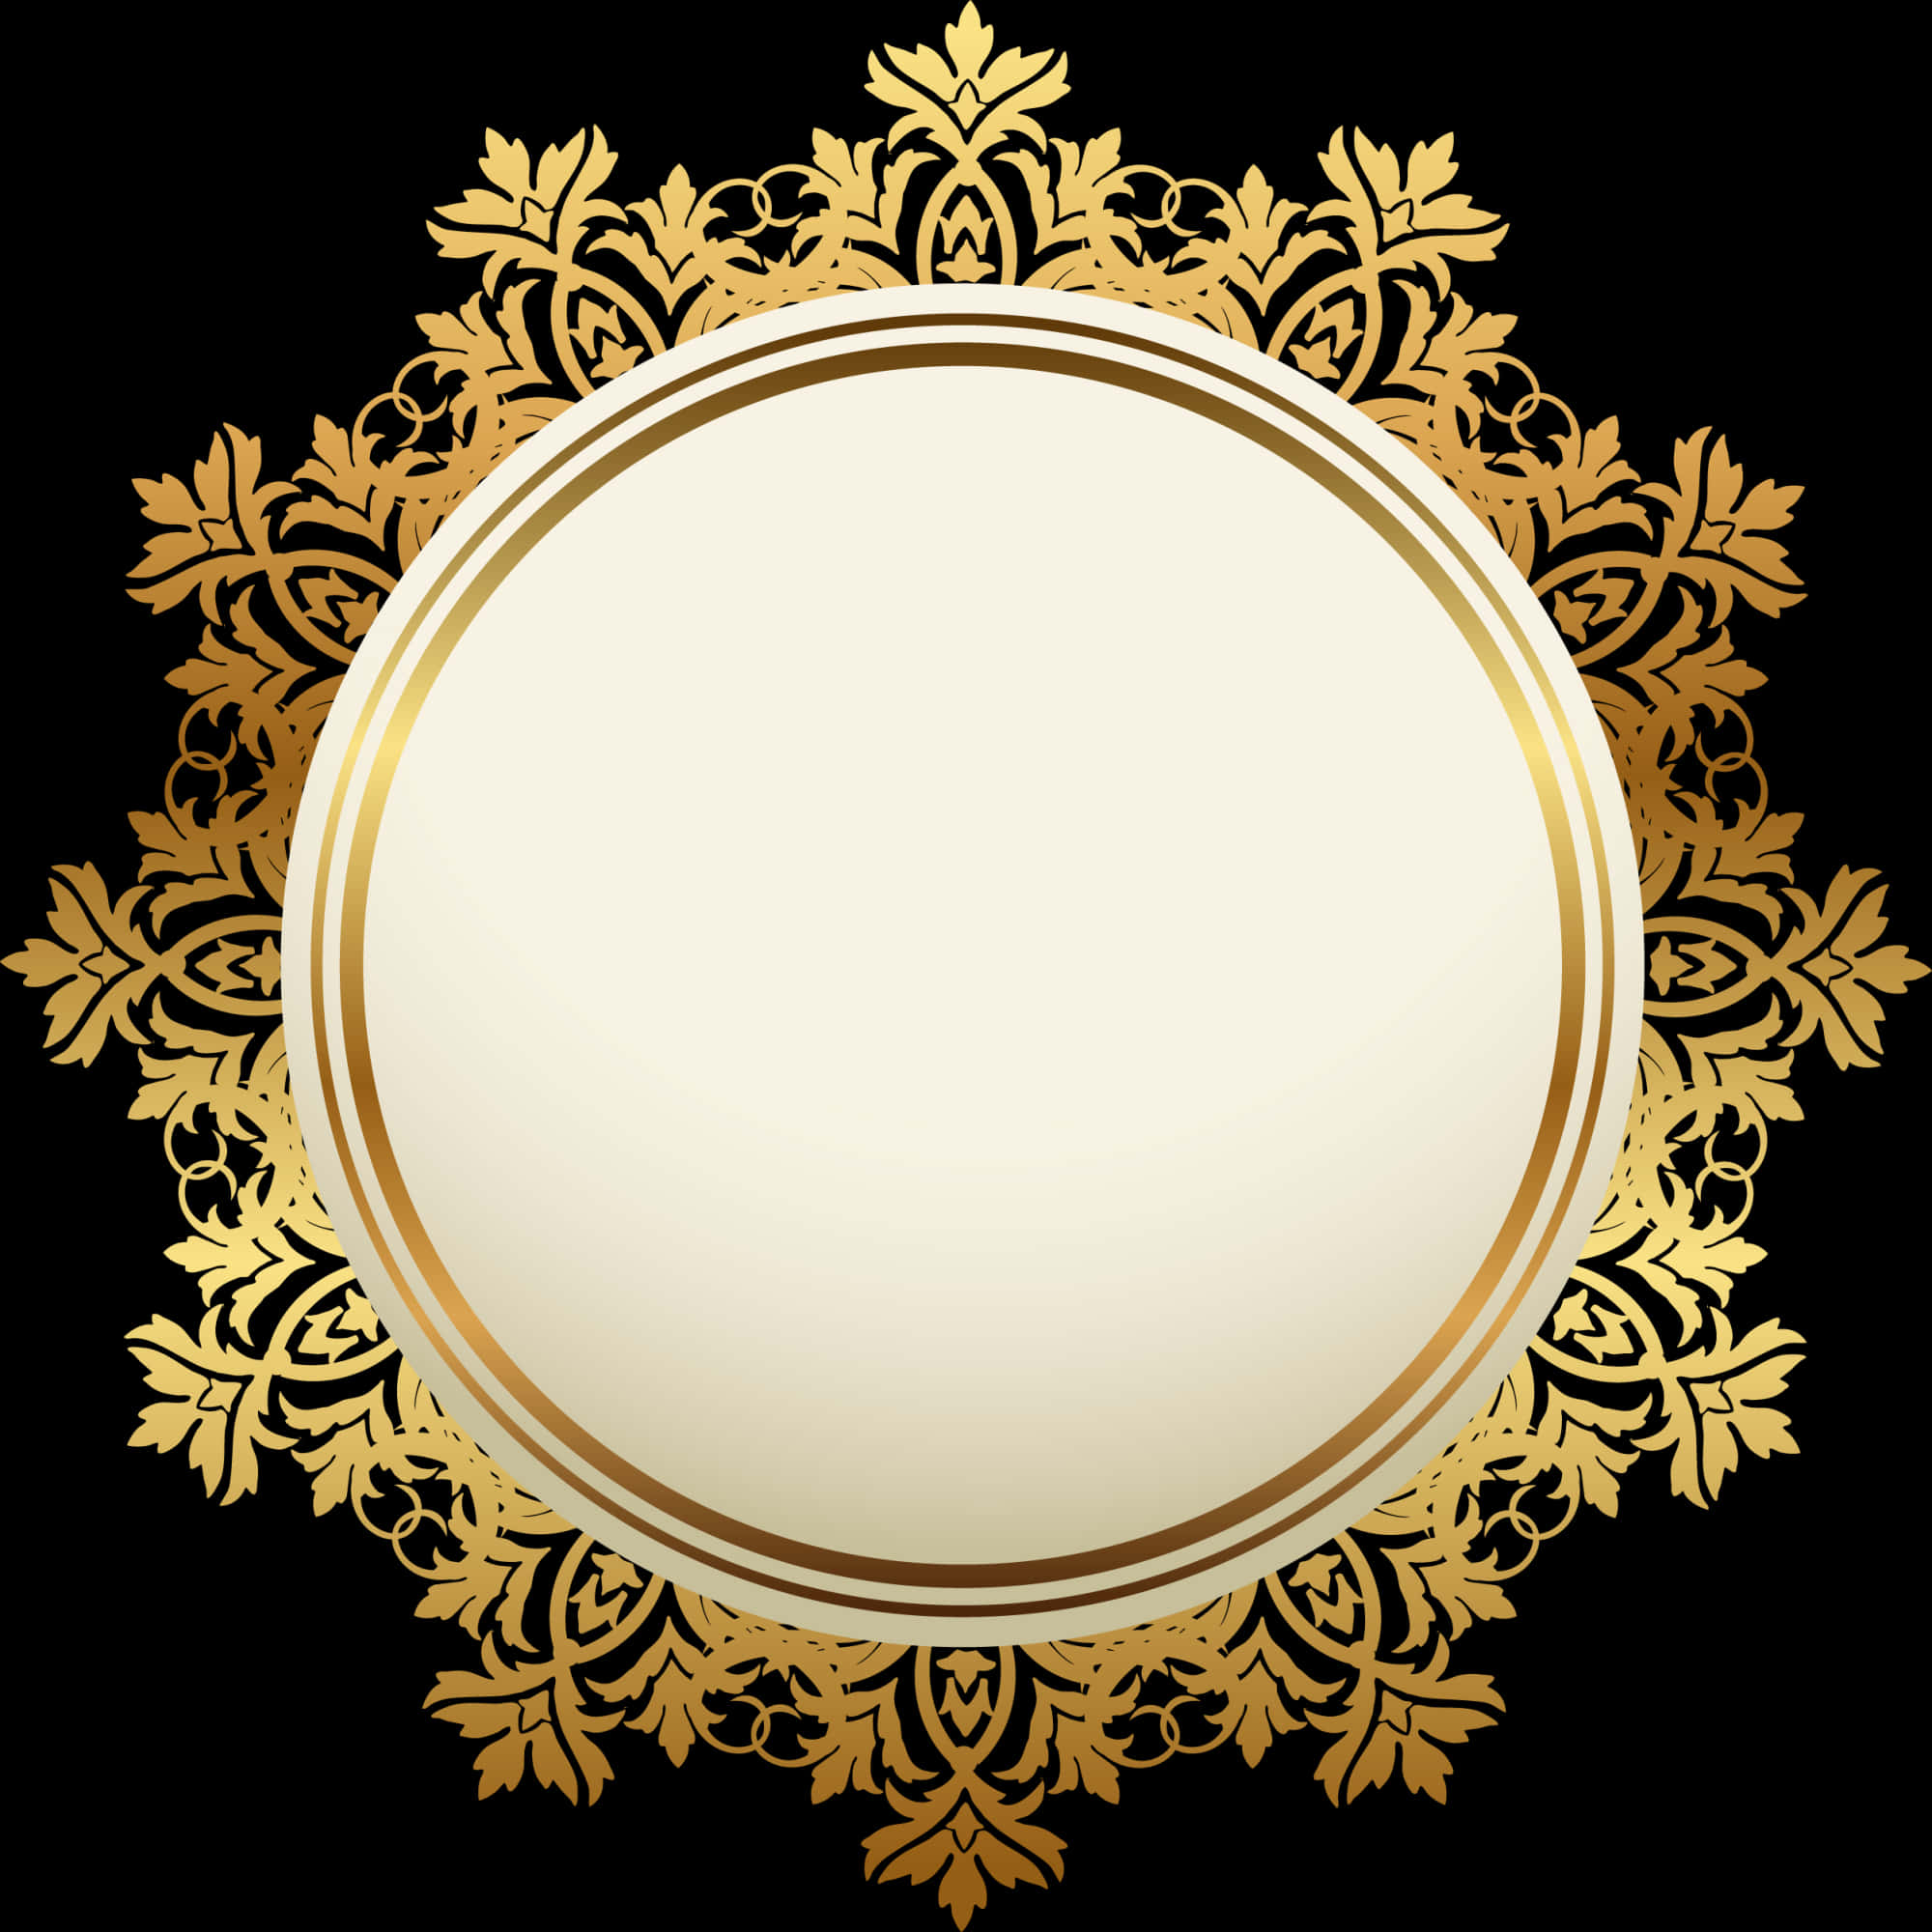 A White And Gold Circular Frame With A Gold Border